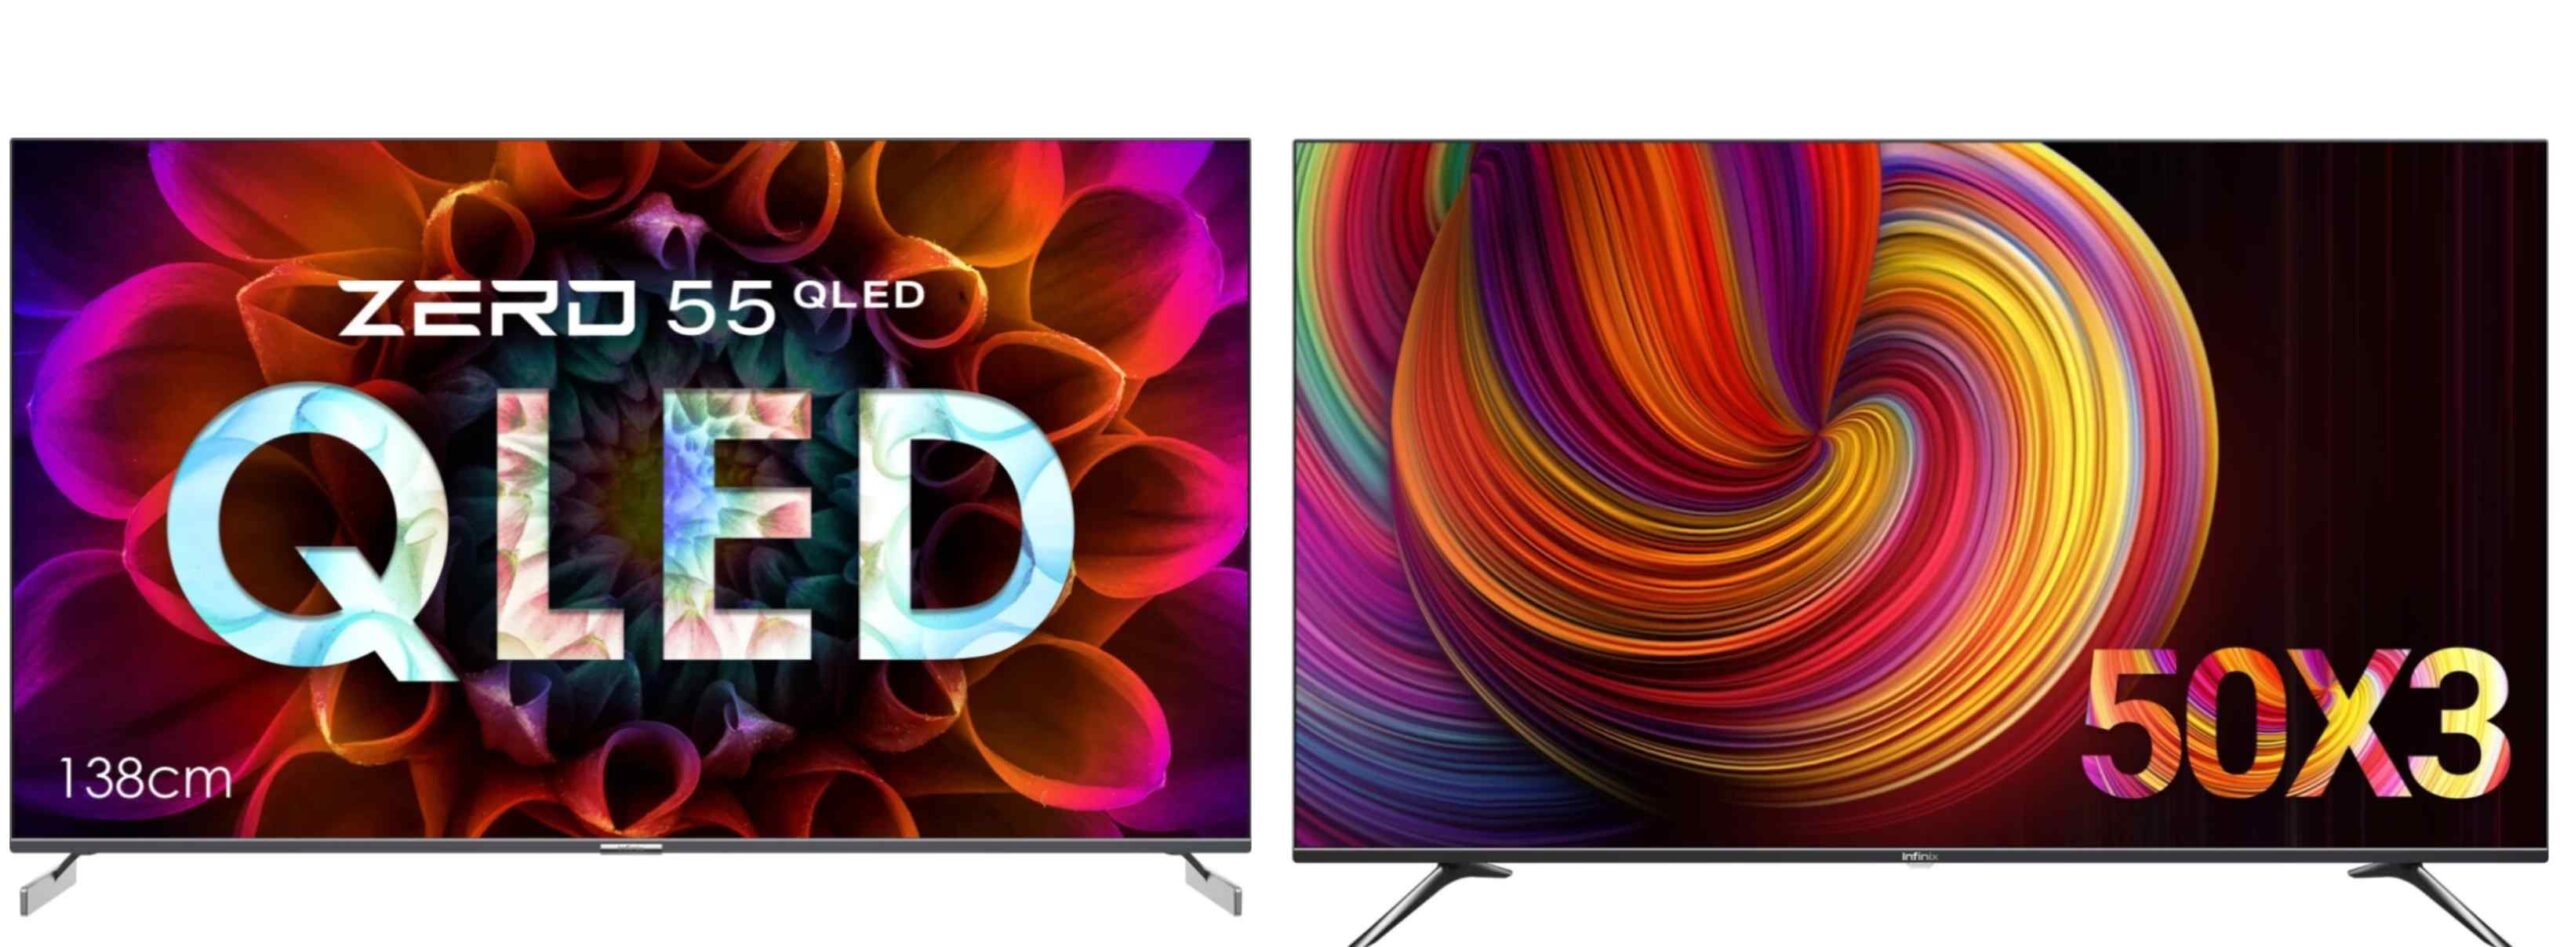 Infinix launches two affordable powerful smart TV Infinix Zero 55 QLED and Infinix X3 50 LED